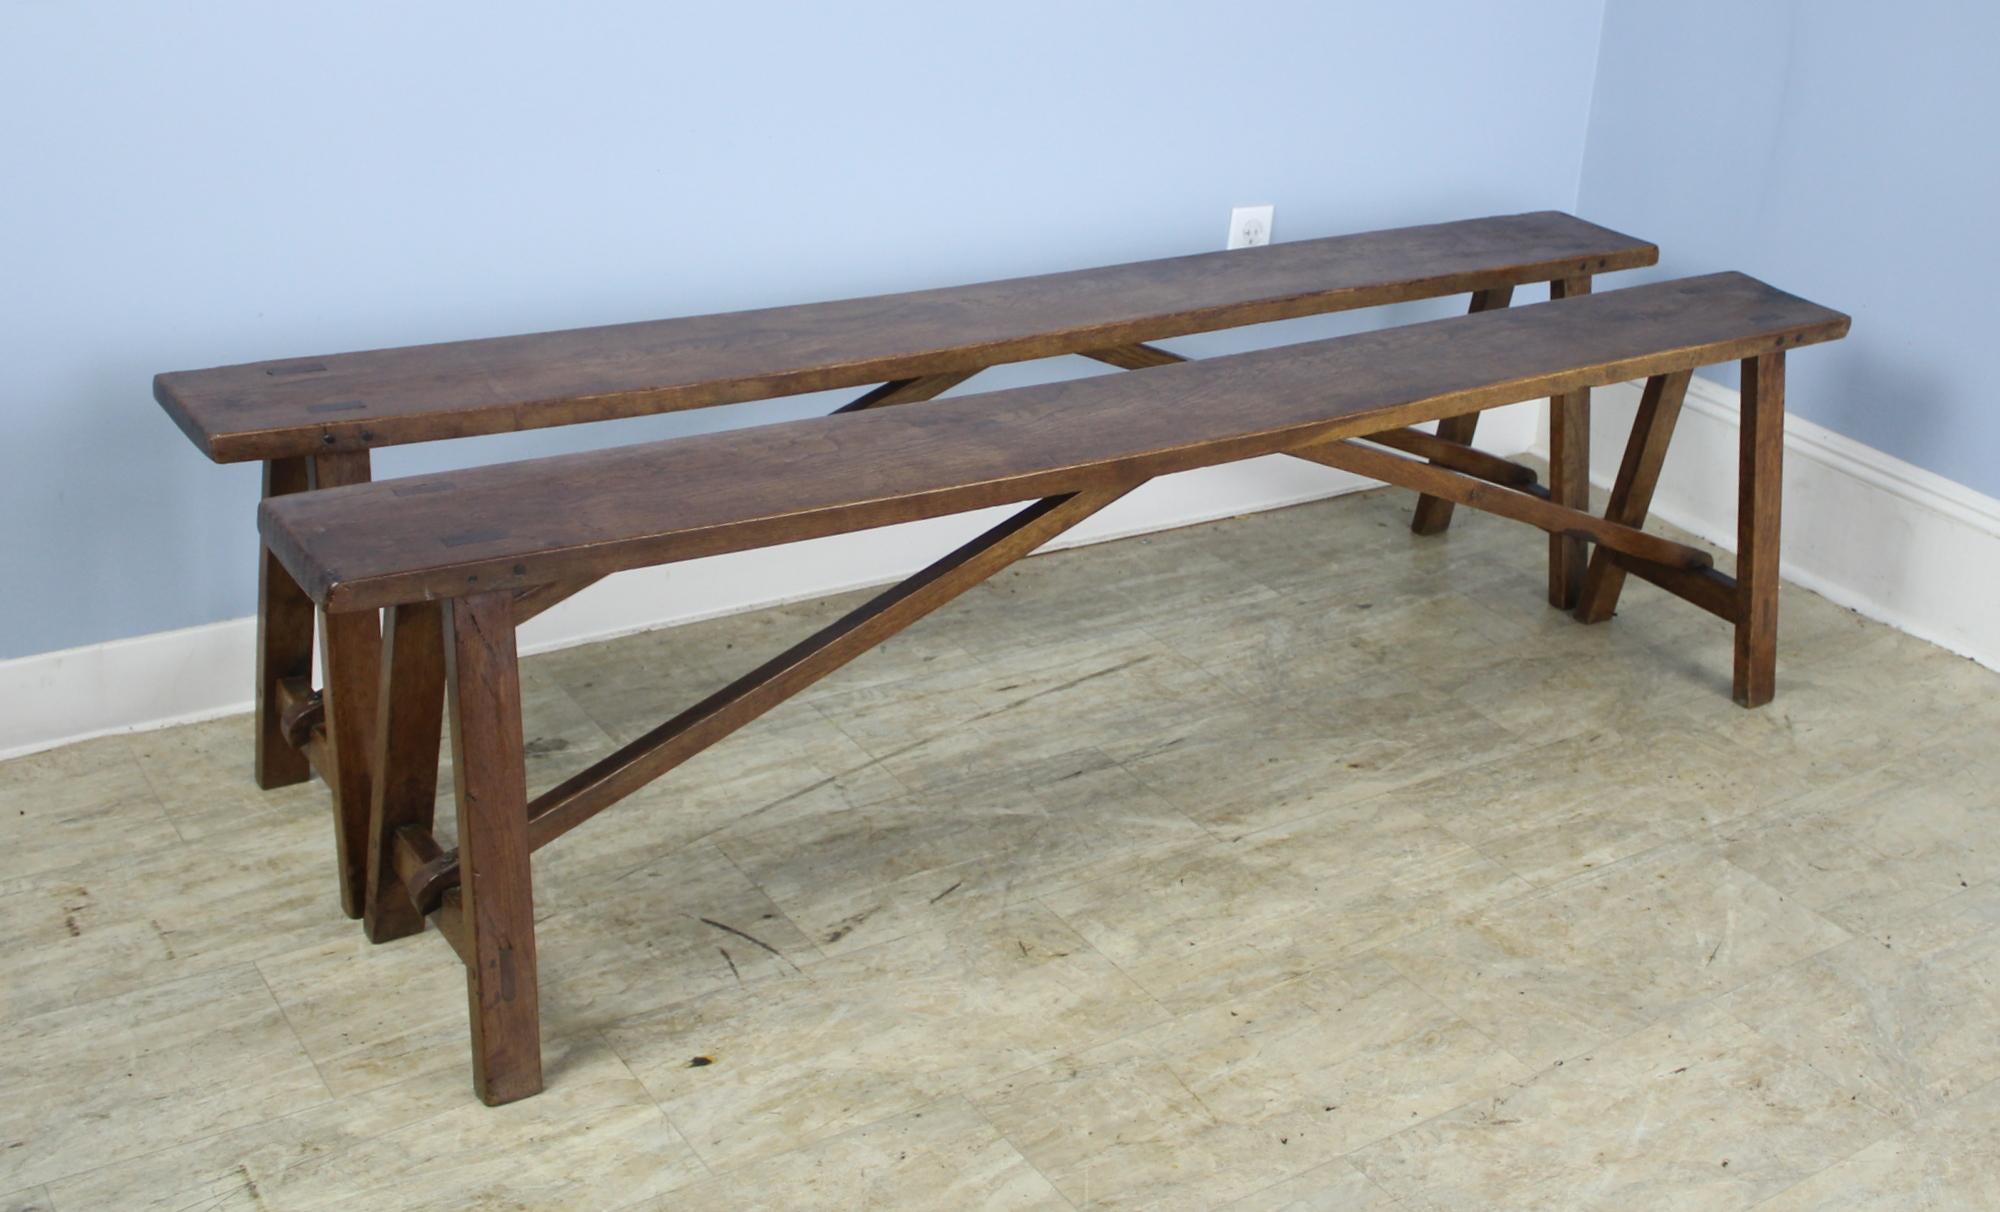 A pair of antique oak benches to put alongside a farm table or provide seating in any room. These two are in very good antique condition with very nice color and patina. Sturdy with good seating height.  These benches have a complementary farm table